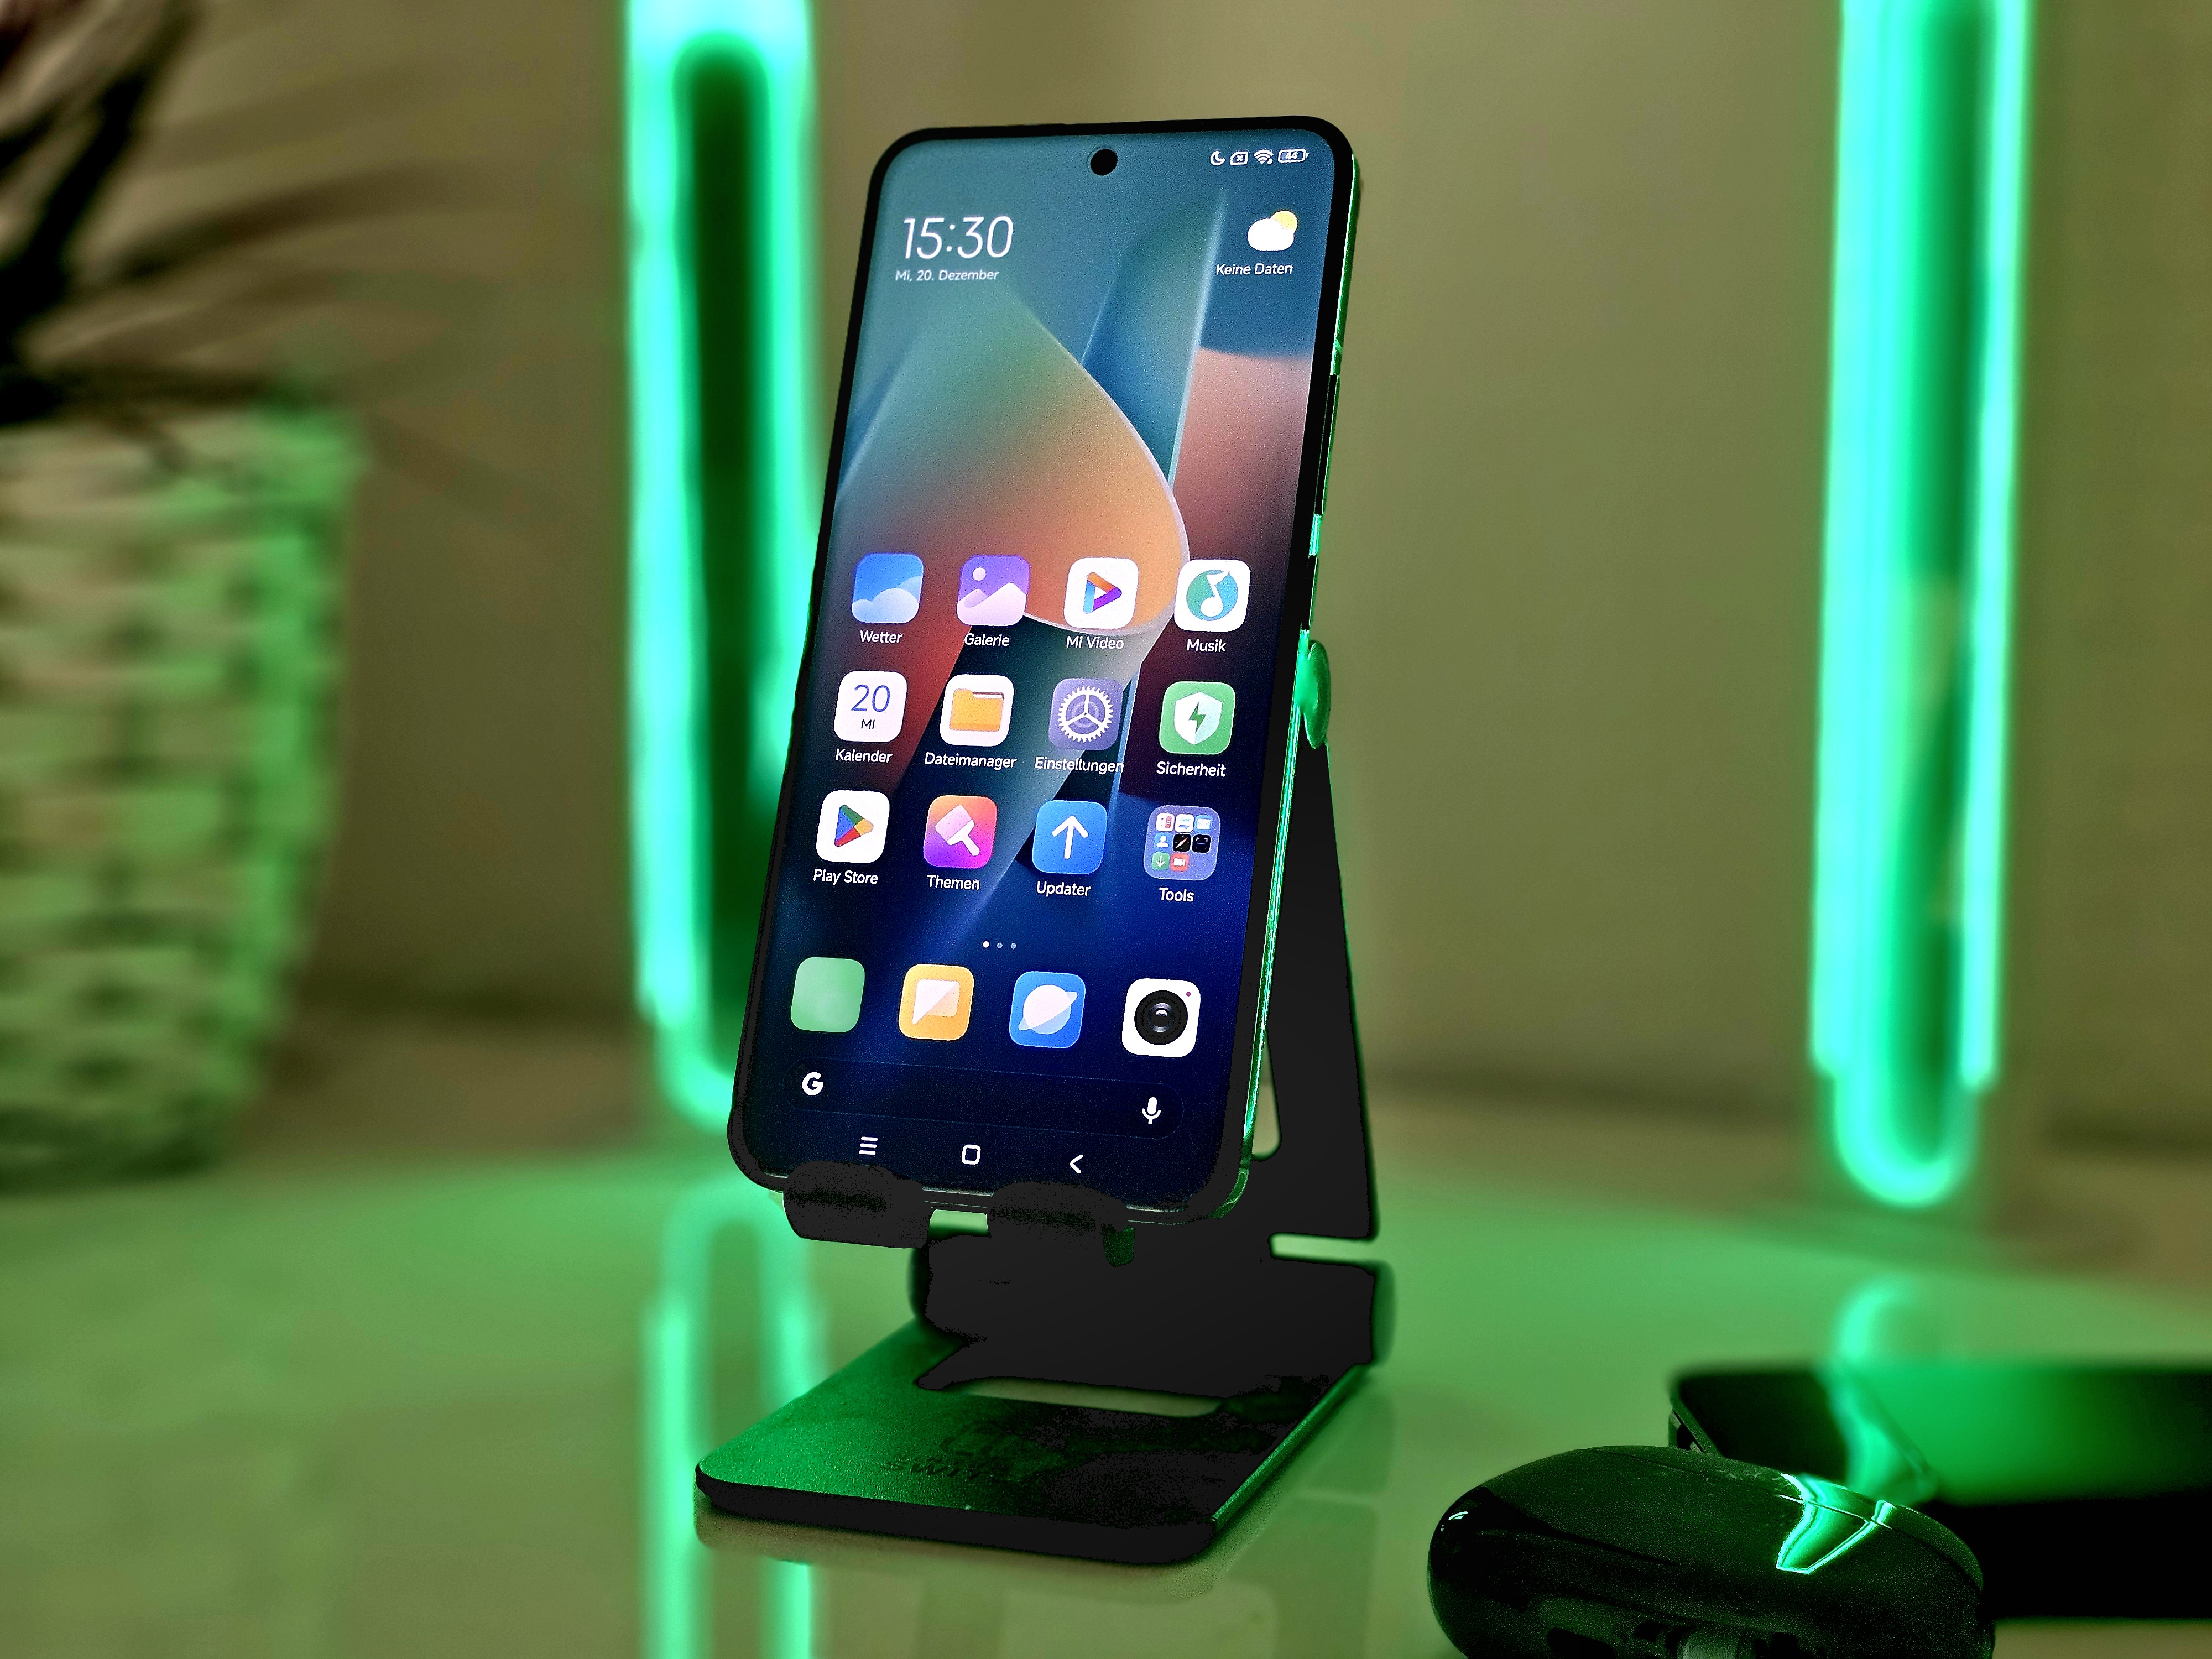 Xiaomi 14 Pro review - Leica camera smartphone with a great display leaves  some questions -  Reviews